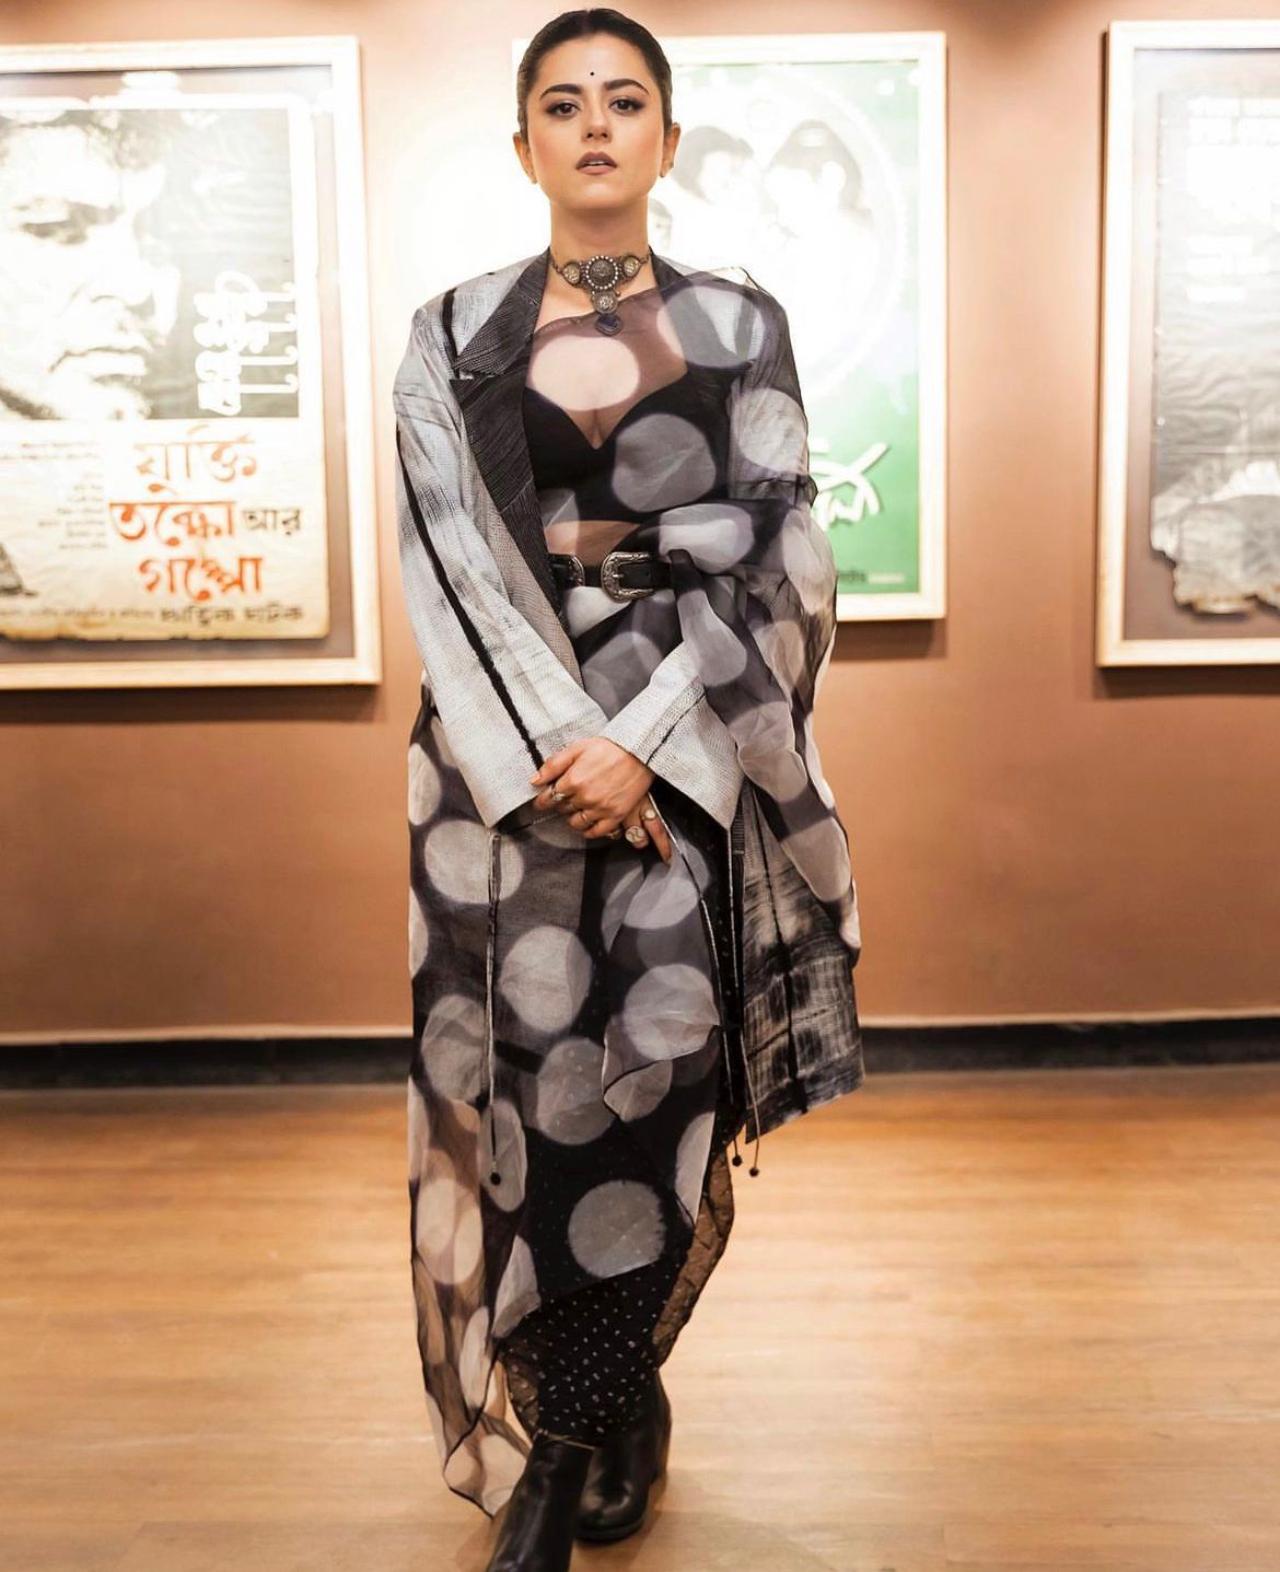 Classic Polka Dot Saree
A classic polka dot saree never goes wrong, here Ridhi gives it an urban touch pairing it up with a coat of same colour combination. To elevate the look she paired it up with a silver choker and a bindi with her hair tied in a sleek bun